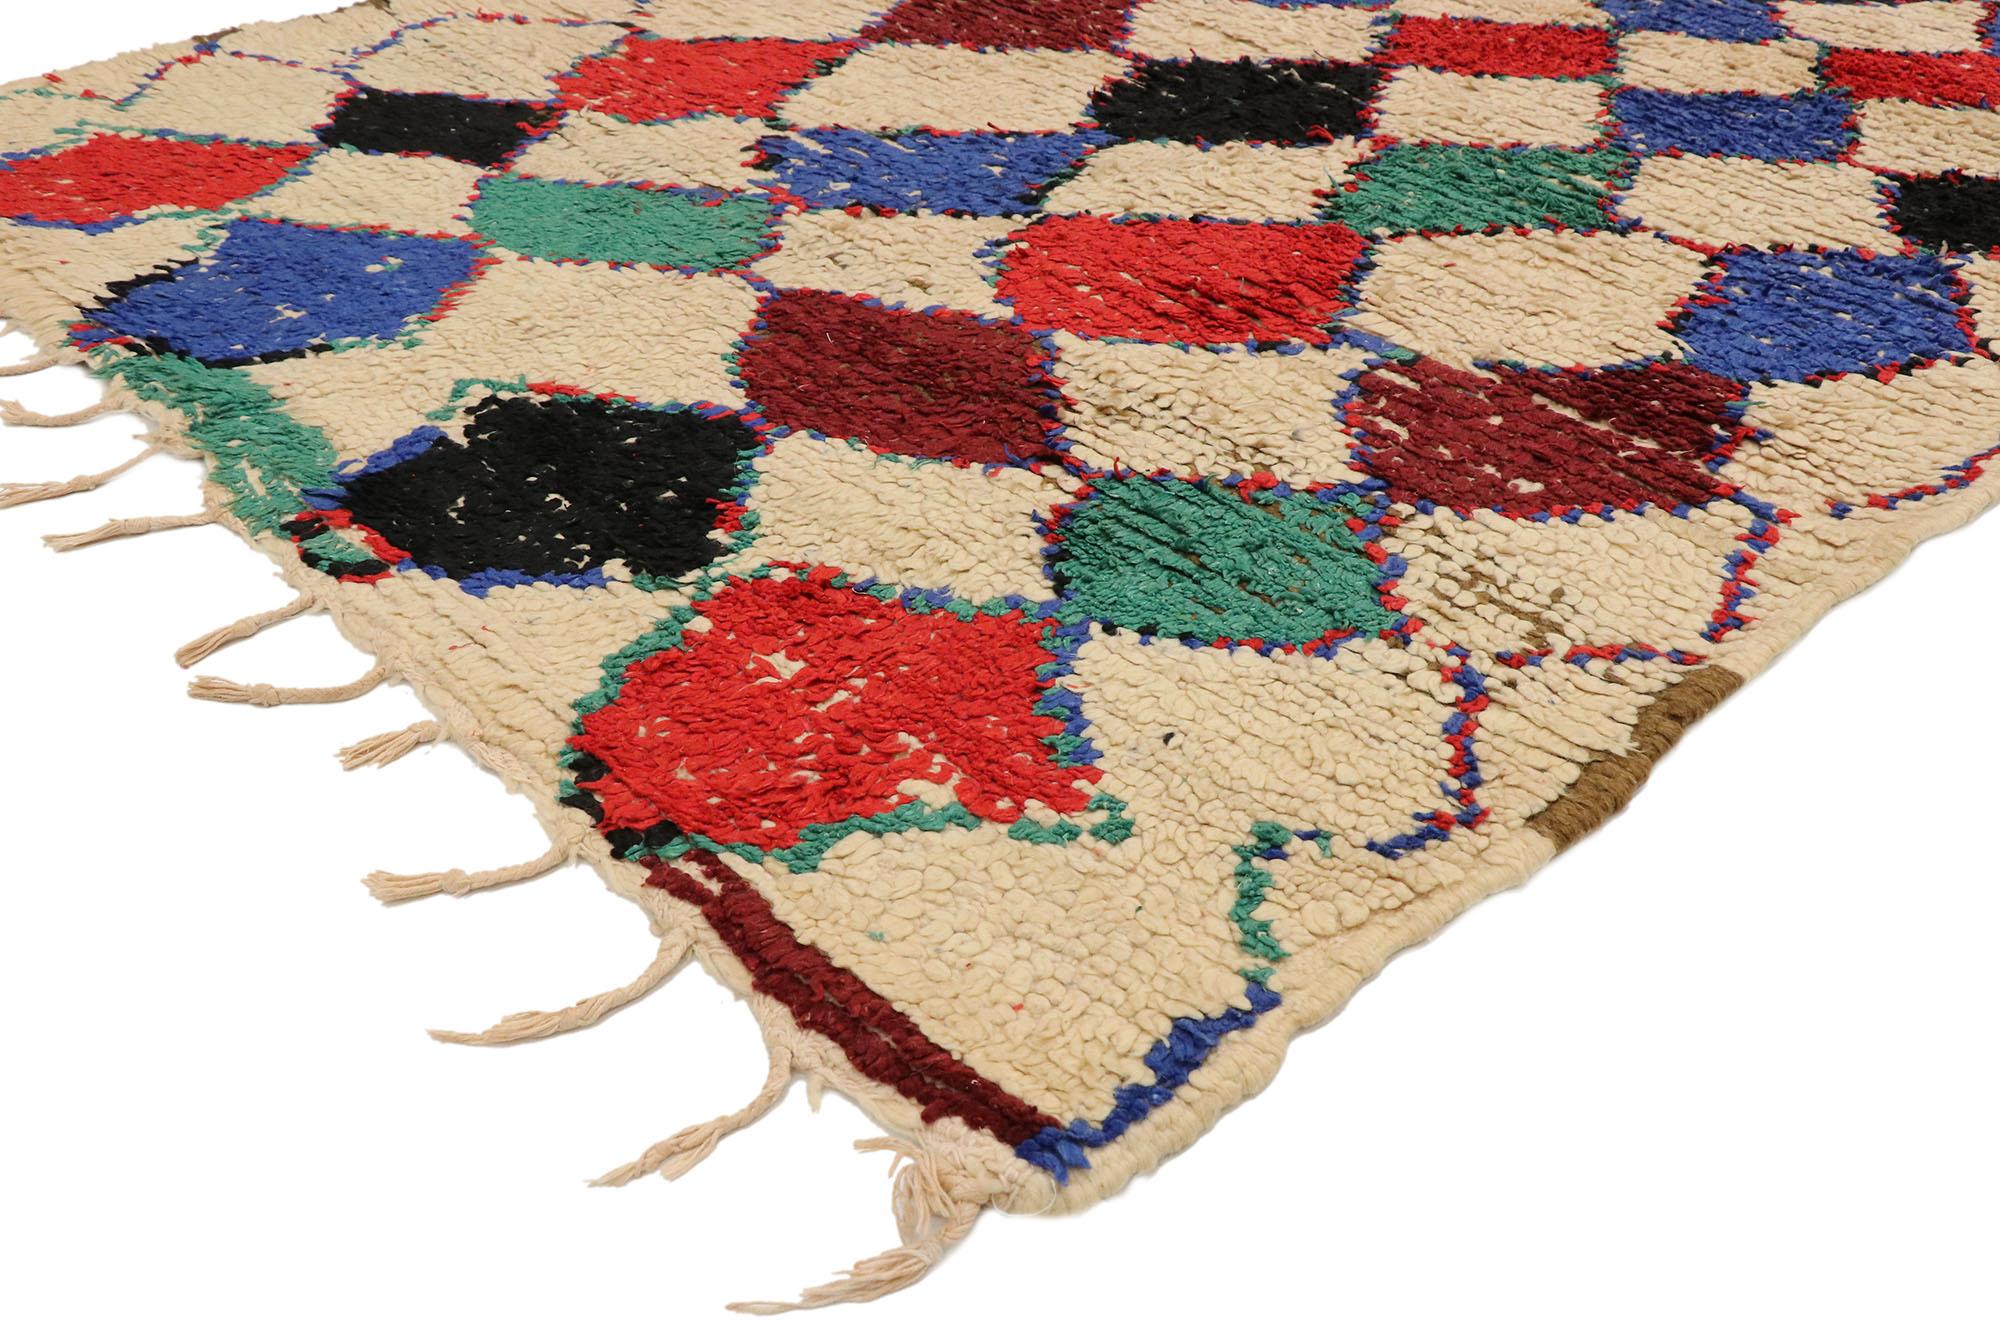 20619, vintage Berber Moroccan Azilal rug with tribal style. Abrashed sandy-beige hues provides the perfect backdrop for the vivid colors featured on this vintage Berber Moroccan Azilal rug. The starkly-colored diamond pattern stands out in contrast